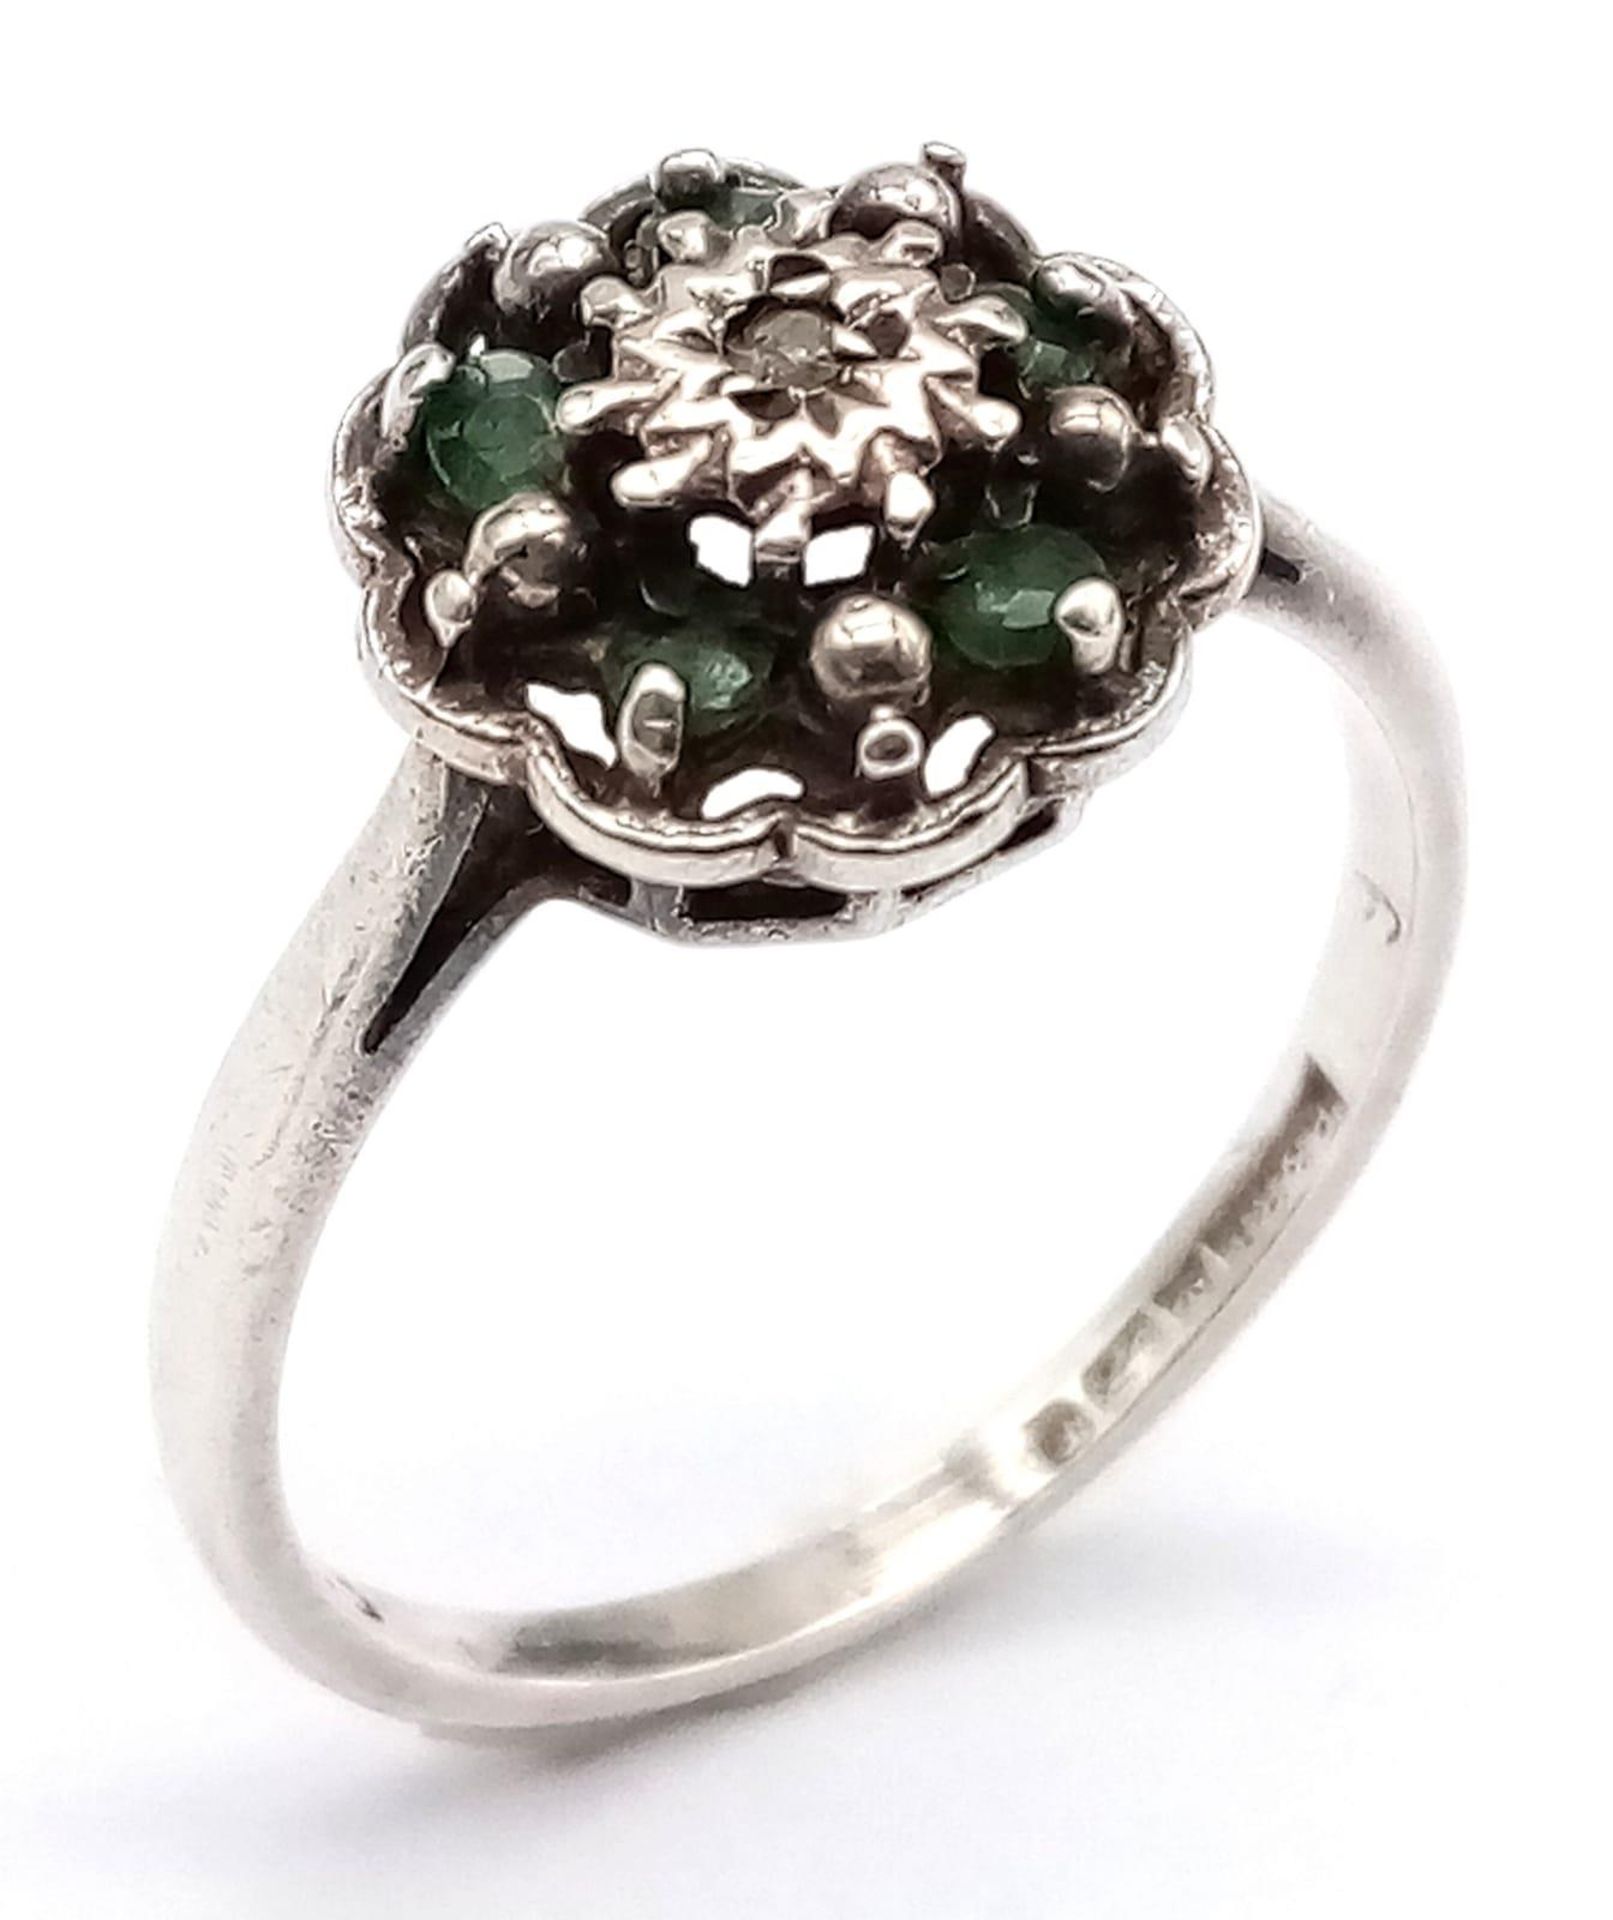 A vintage 14K white gold Emerald and Diamond floral cluster ring. Come with full Birmingham